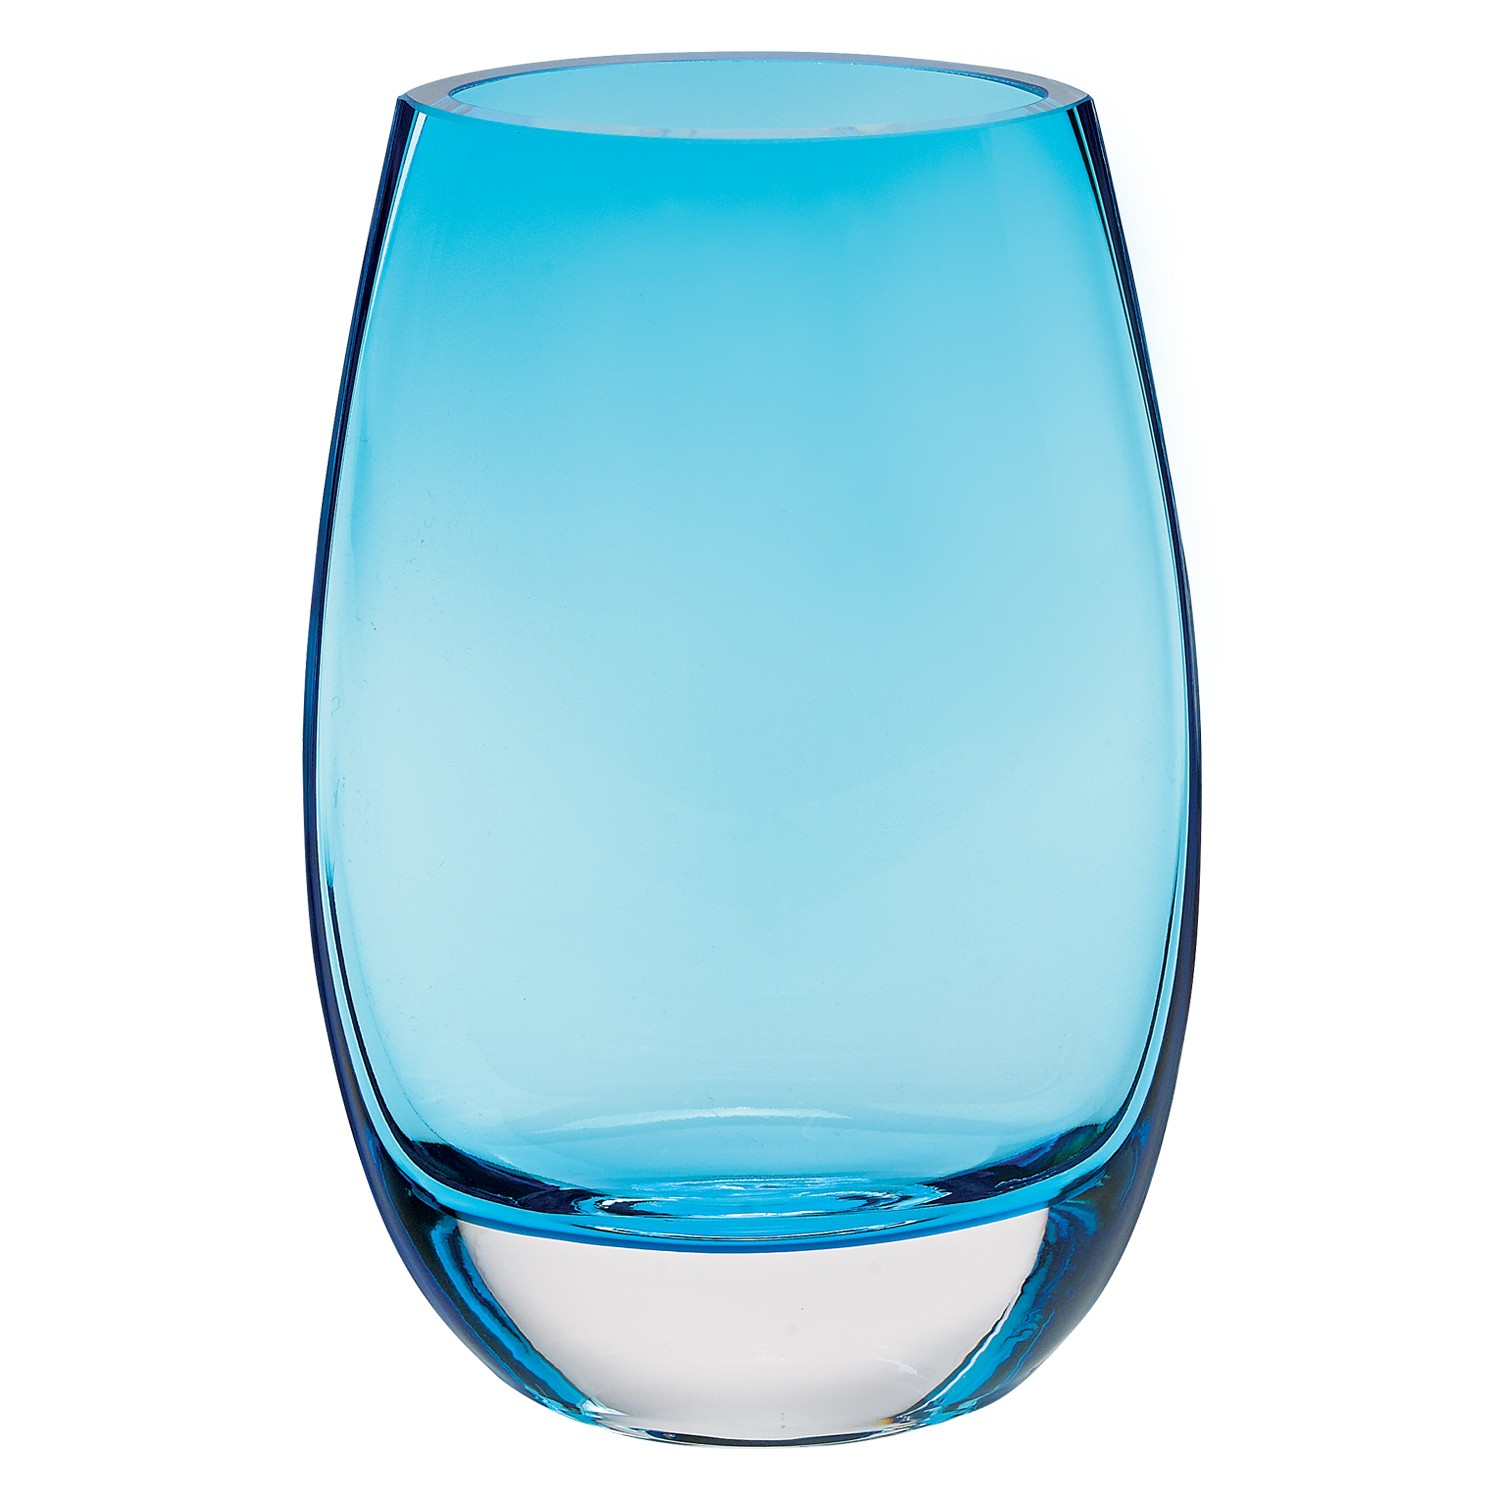 8" Mouth Blown Crystal Lead Free Oval Thick Aqua Blue Walled Vase